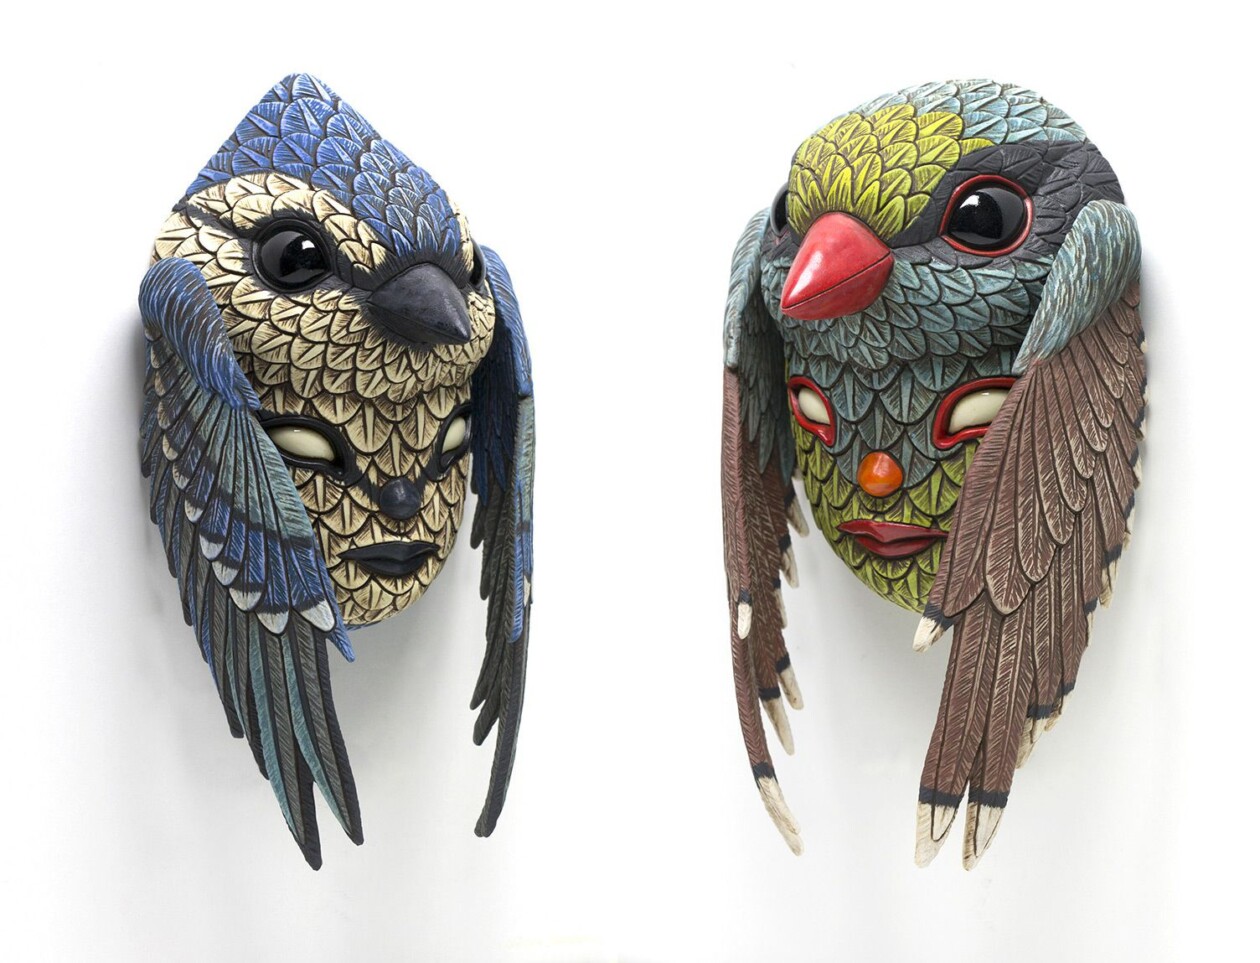 Marvelous Anthropomorphized Bird Sculptures By Calvin Ma (7)